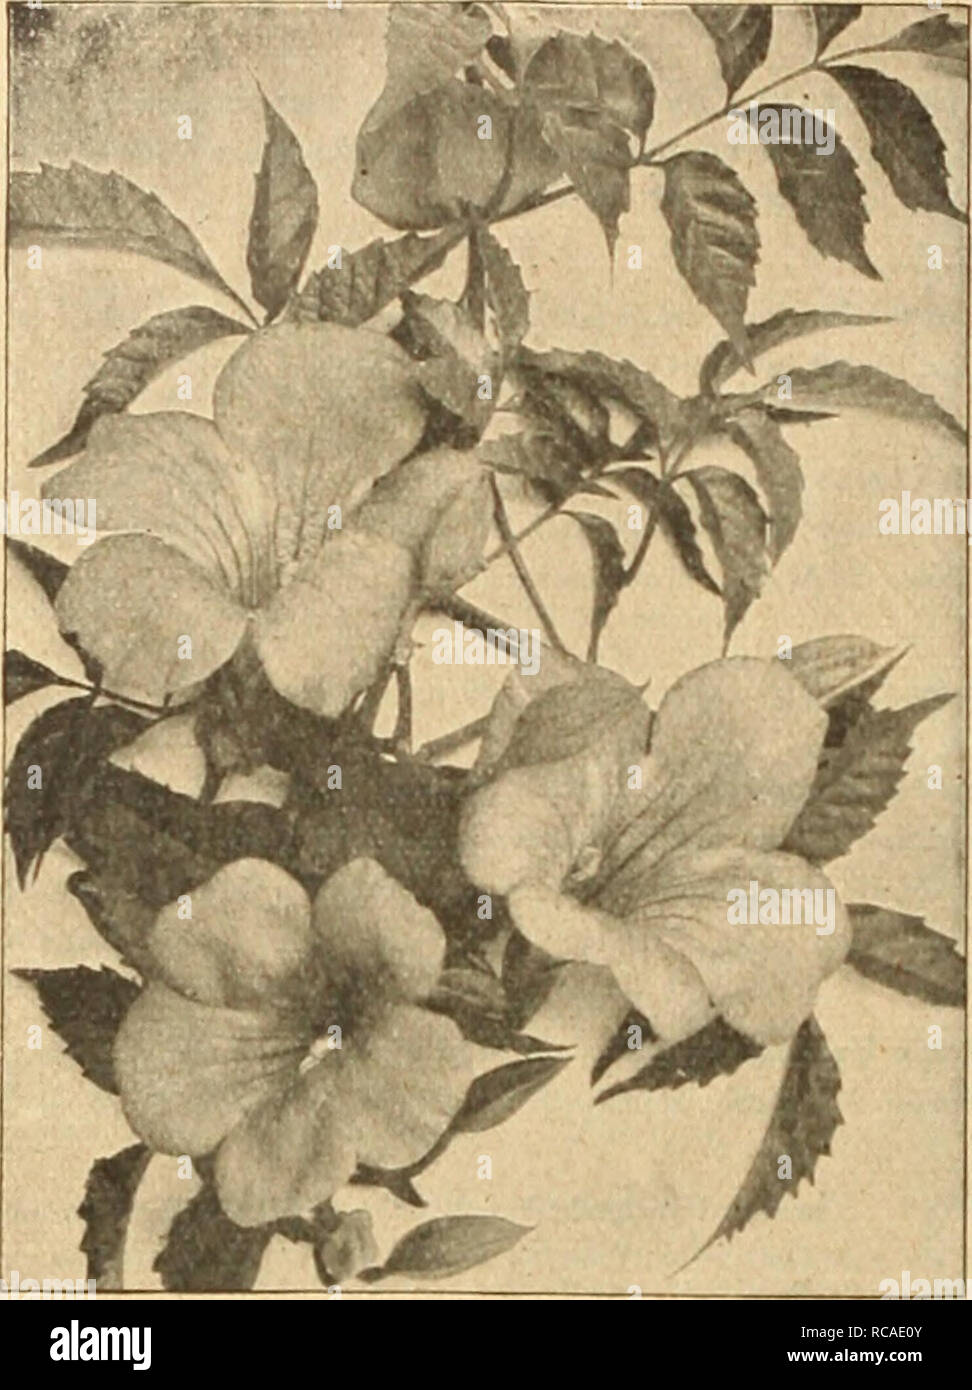 . Dreer's autumn catalogue 1926. Bulbs (Plants) Catalogs; Flowers Seeds Catalogs; Gardening Equipment and supplies Catalogs; Nurseries (Horticulture) Catalogs; Vegetables Seeds Catalogs. Dreer's Select Hardy Climbing Plants. BiGNONU, OR Trumpet Vine BignOnia (Trumpet vine) Grandiflora. The true large flowered type with large showy orange- red flowers. SI.50 each. Radicans. For covering unsightly places, stumps, rockwork, or wherever a showj'-flowering vine is desired, this will be found very useful. The dark red flowers, with orange throat, are attractive, and borne profusely; very hardy. 50 c Stock Photo